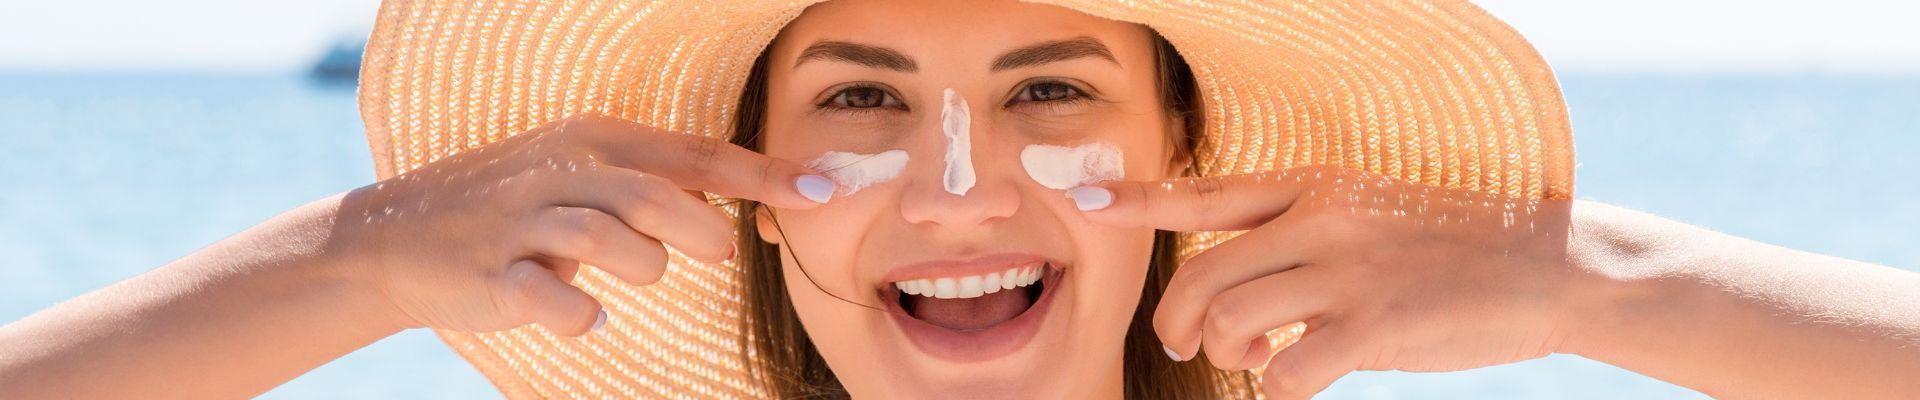 The Best Sunscreens Recommended by Doctors and Beauty Experts